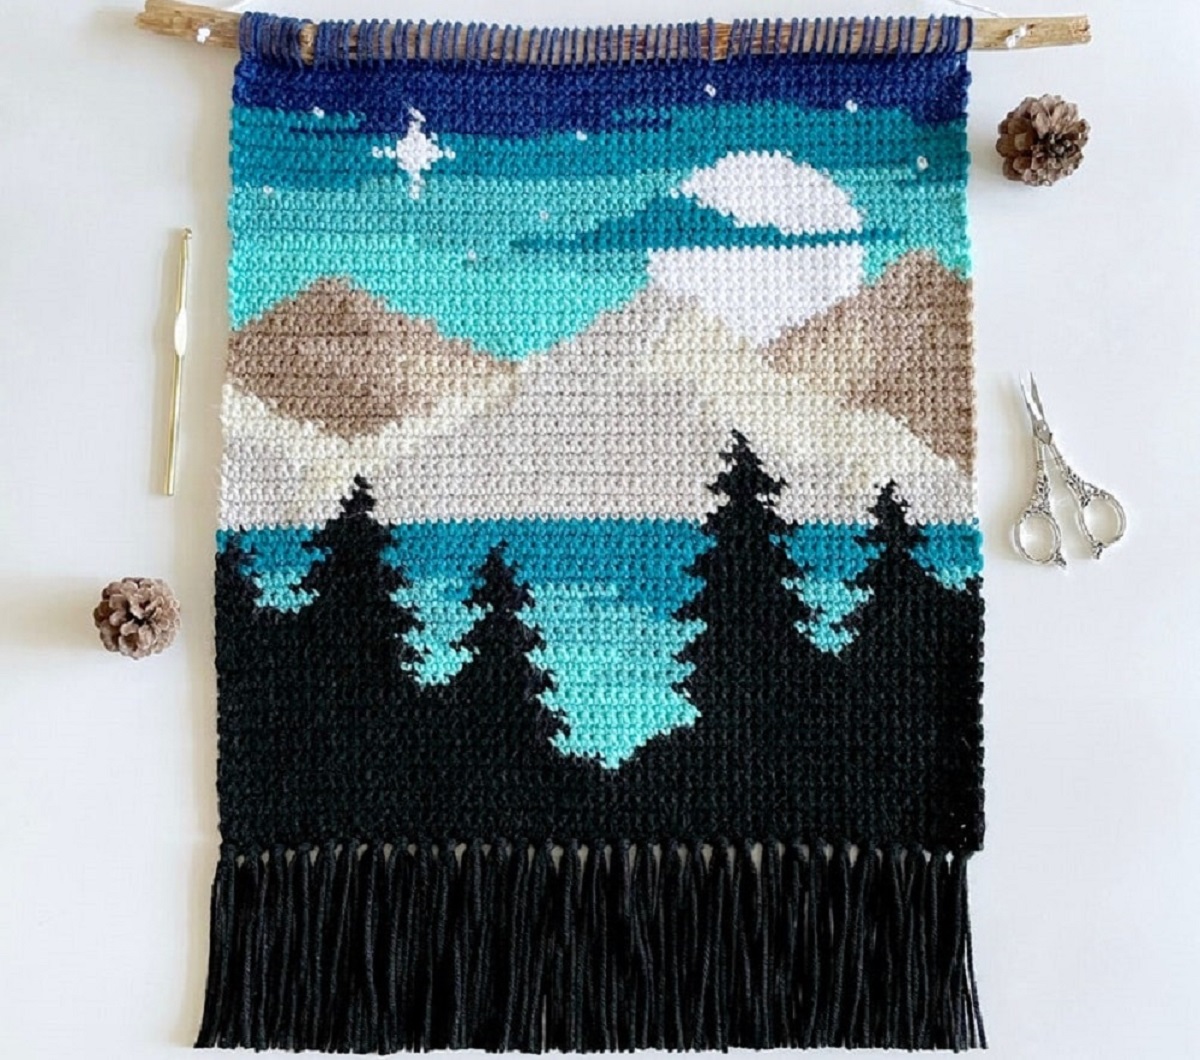 Crochet wall hanging of beige and brown mountains, a blue sky with stars, blue lake and black tree outlines. 